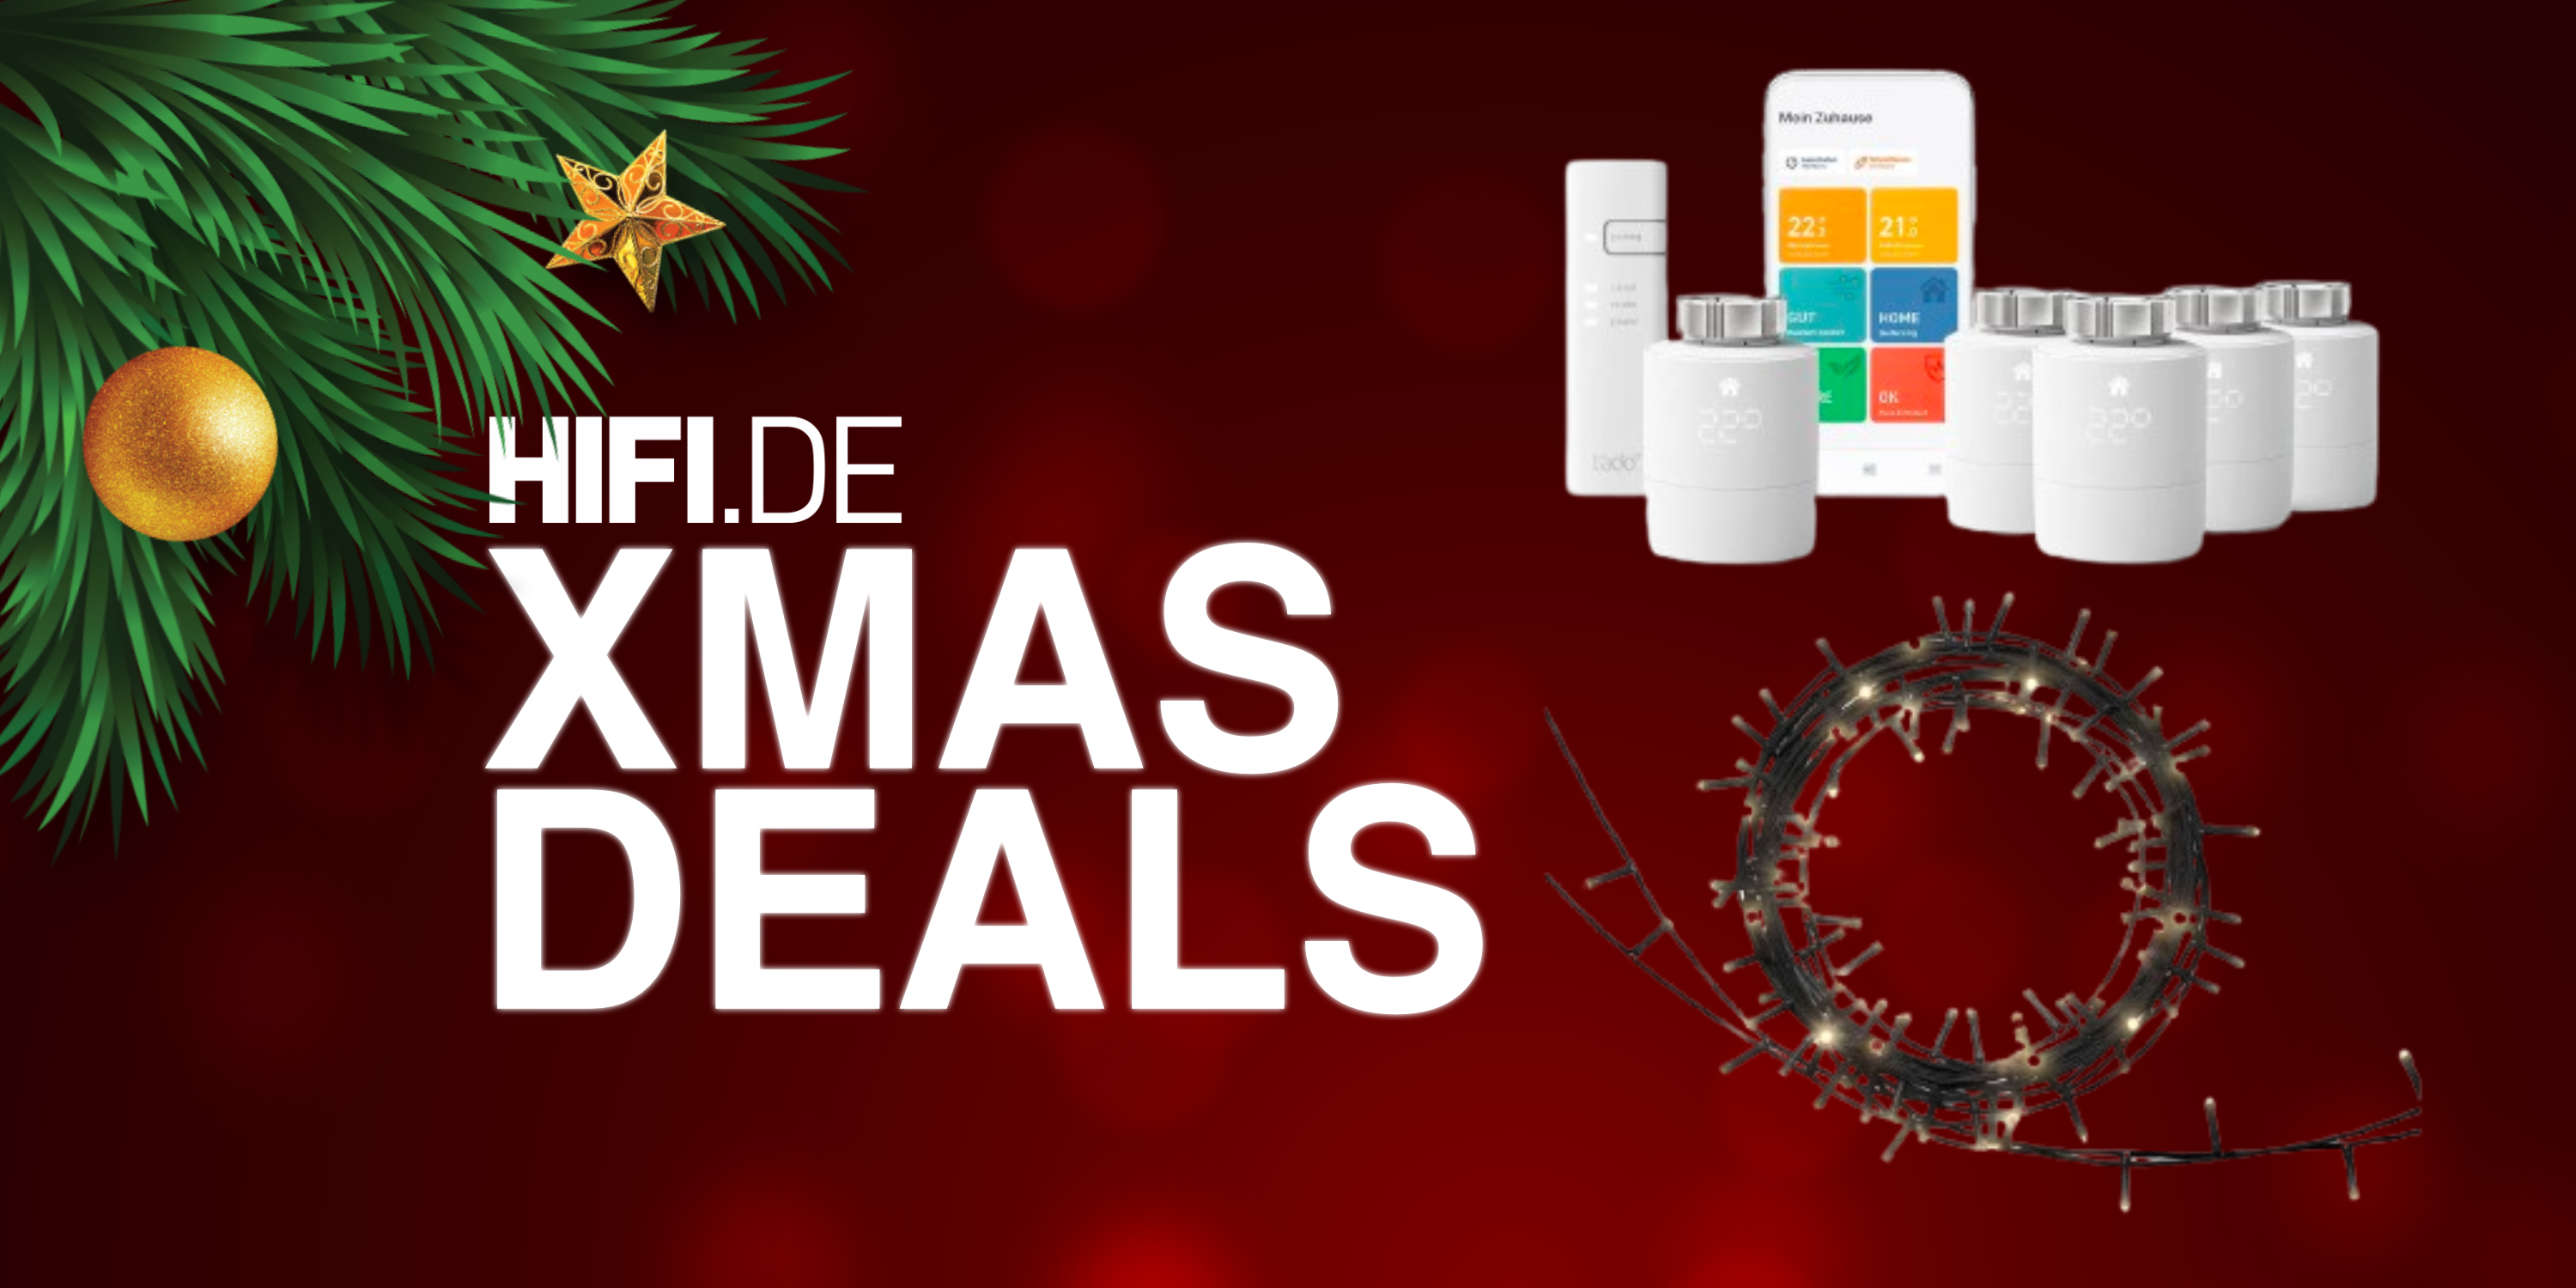 Tado Smart Thermostats + Christmas Gift: Currently marked down by over 50 percent!